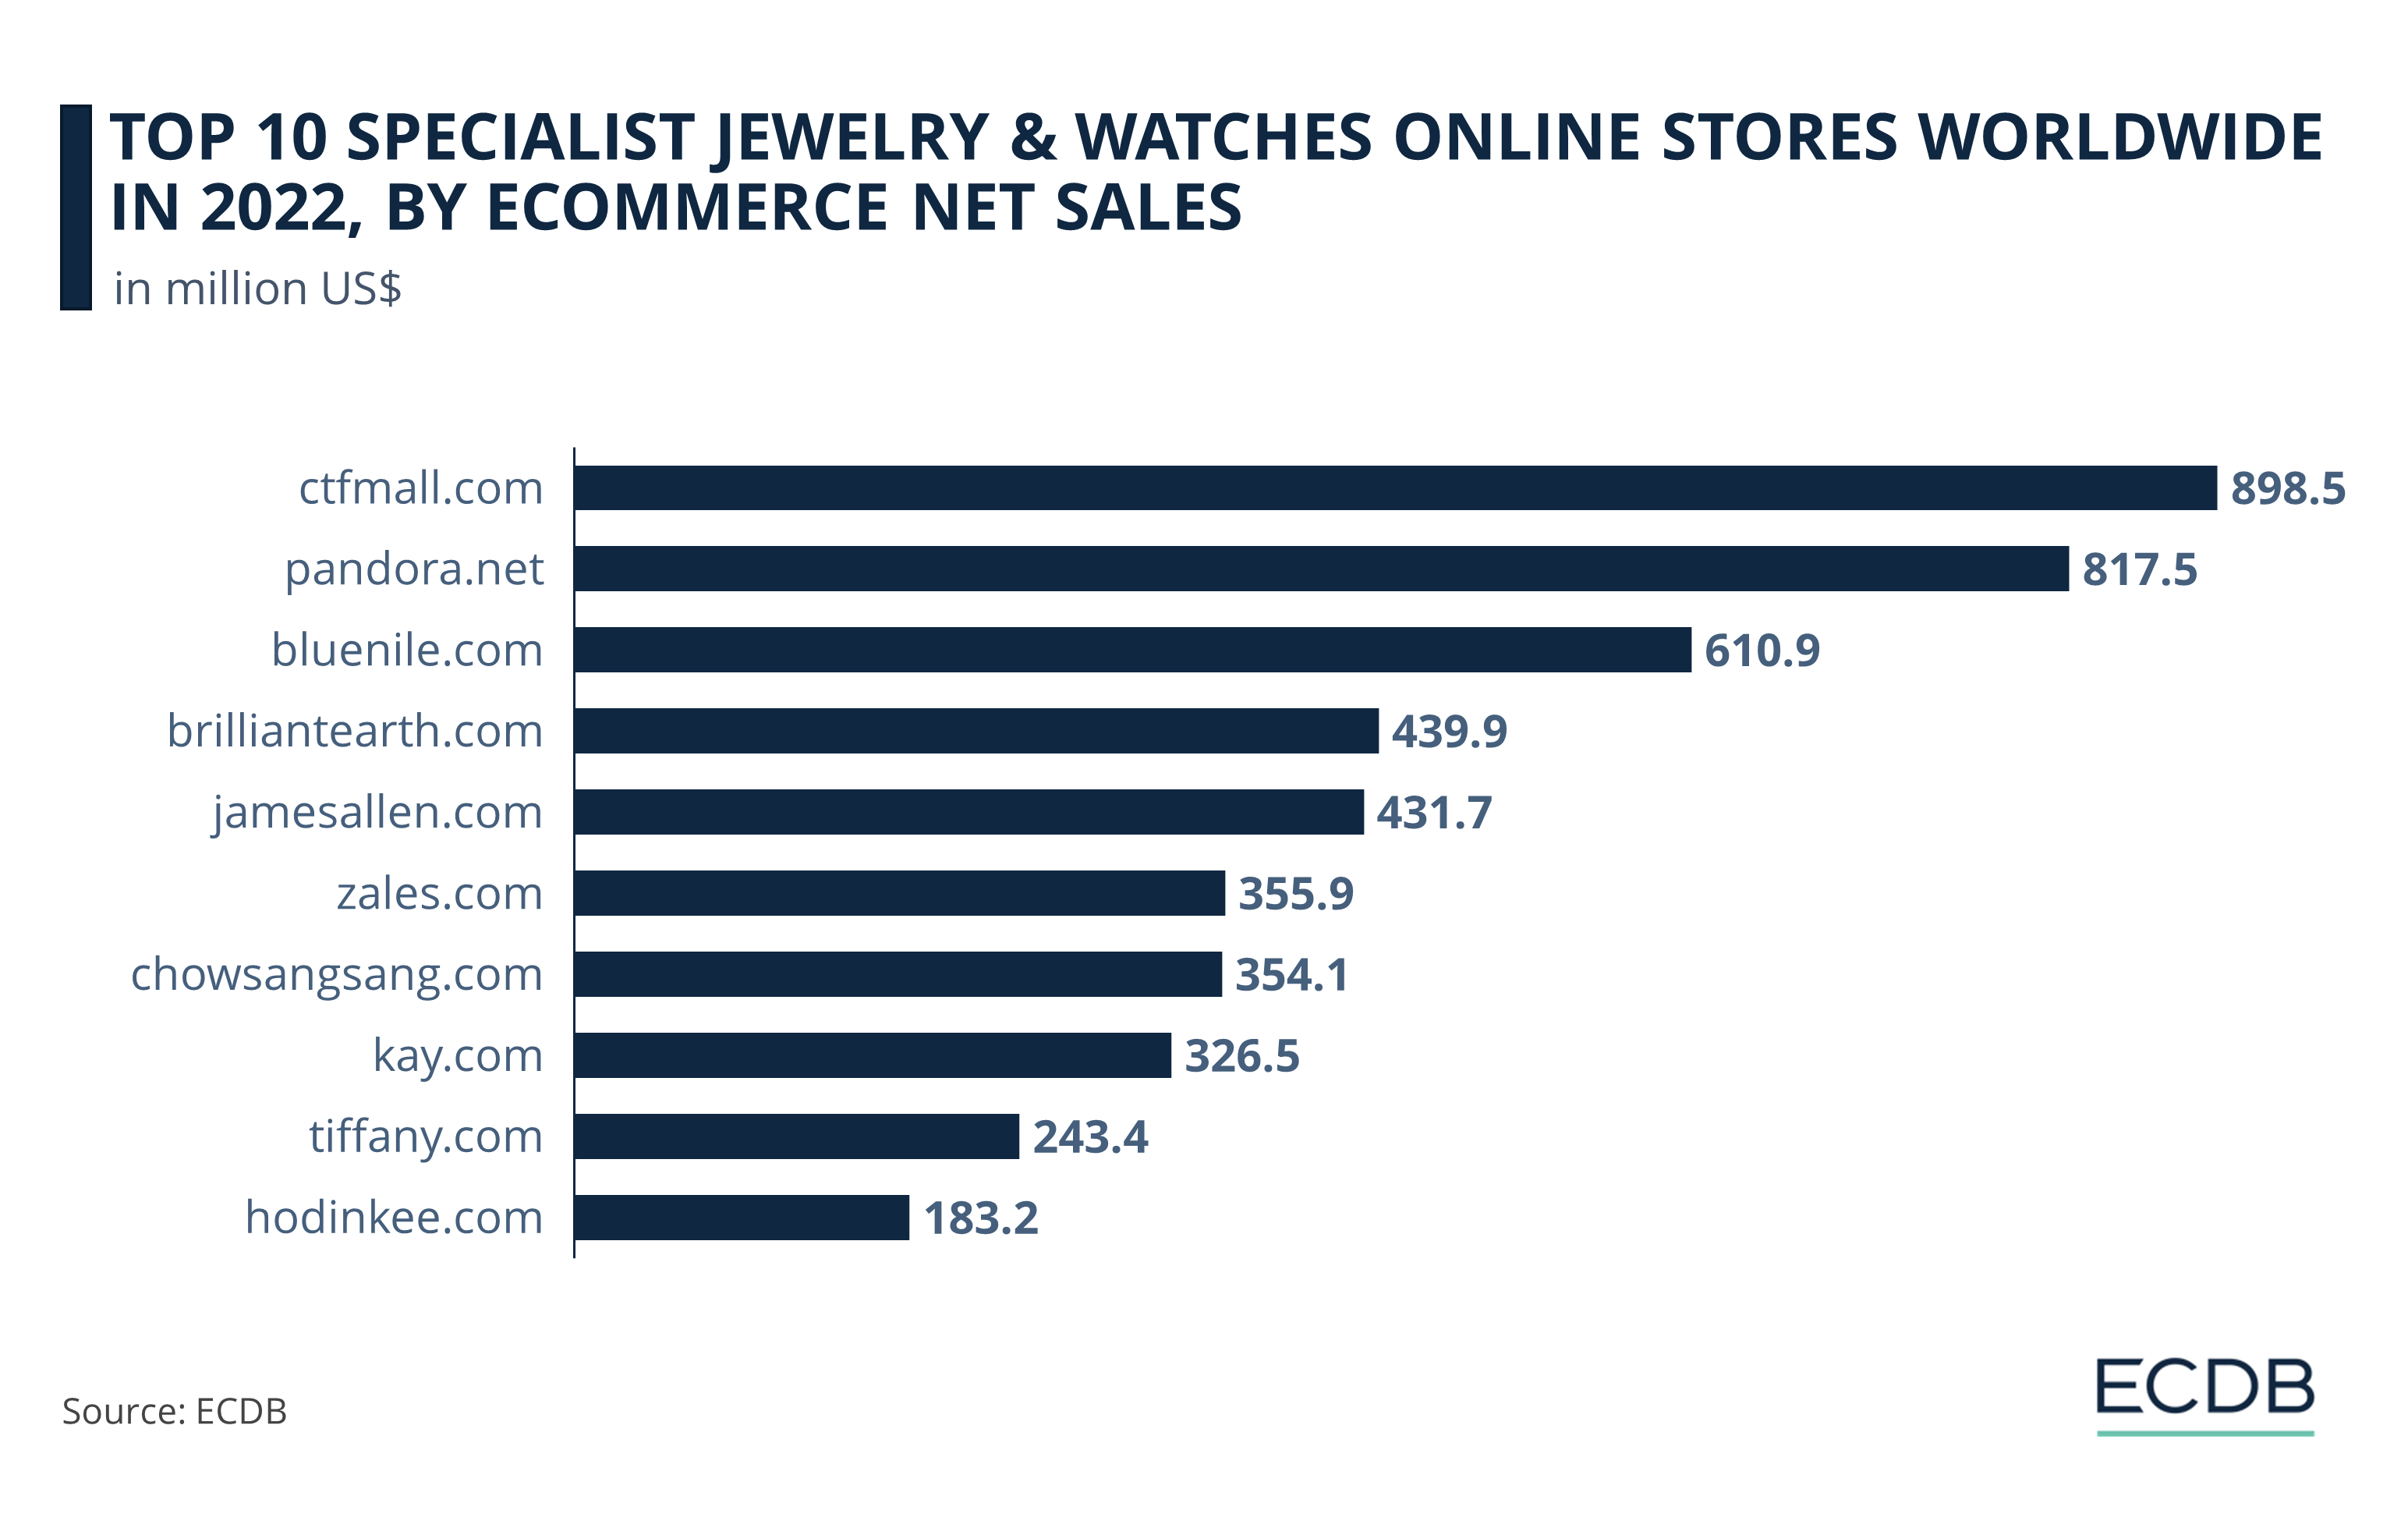 Top 10 Specialist Jewelry & Watches Online Stores Worldwide in 2022, by eCommerce Net Sales